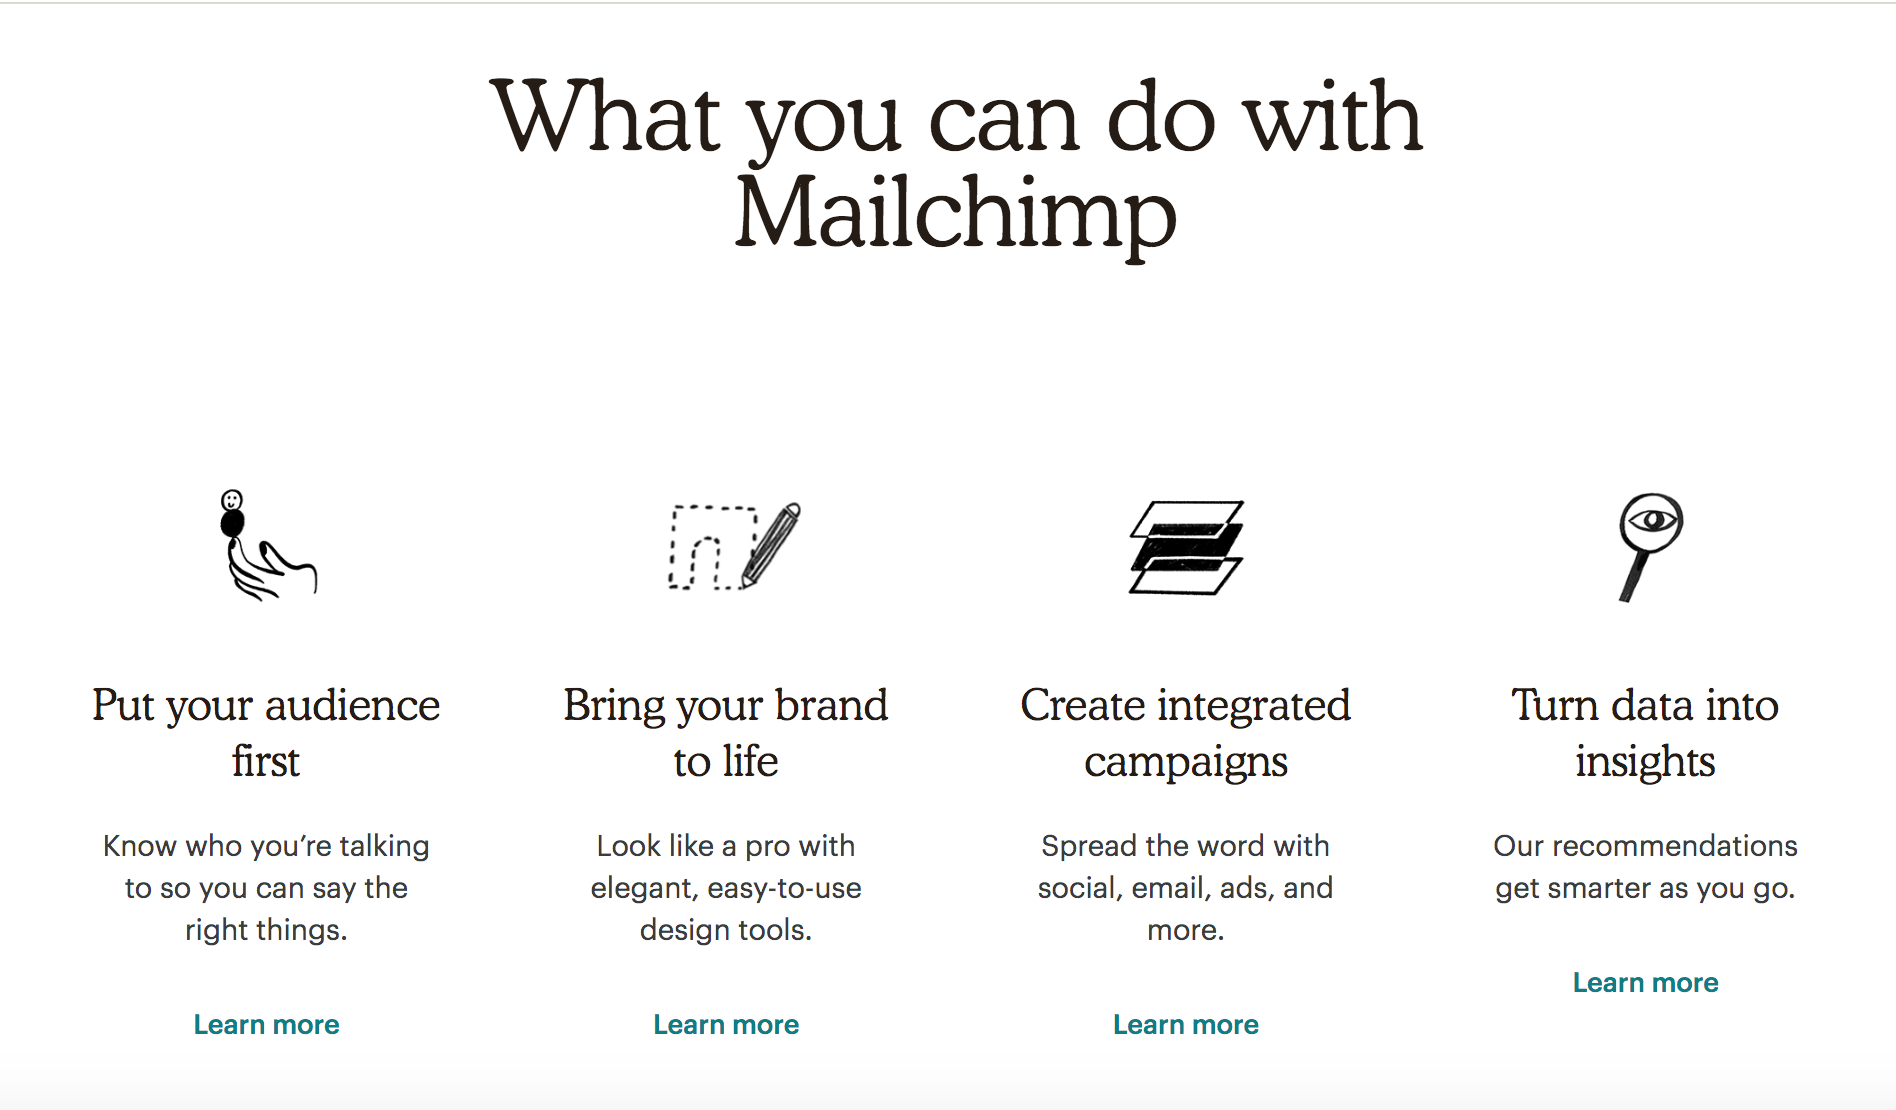 Mailchimp's functionality - email marketing software